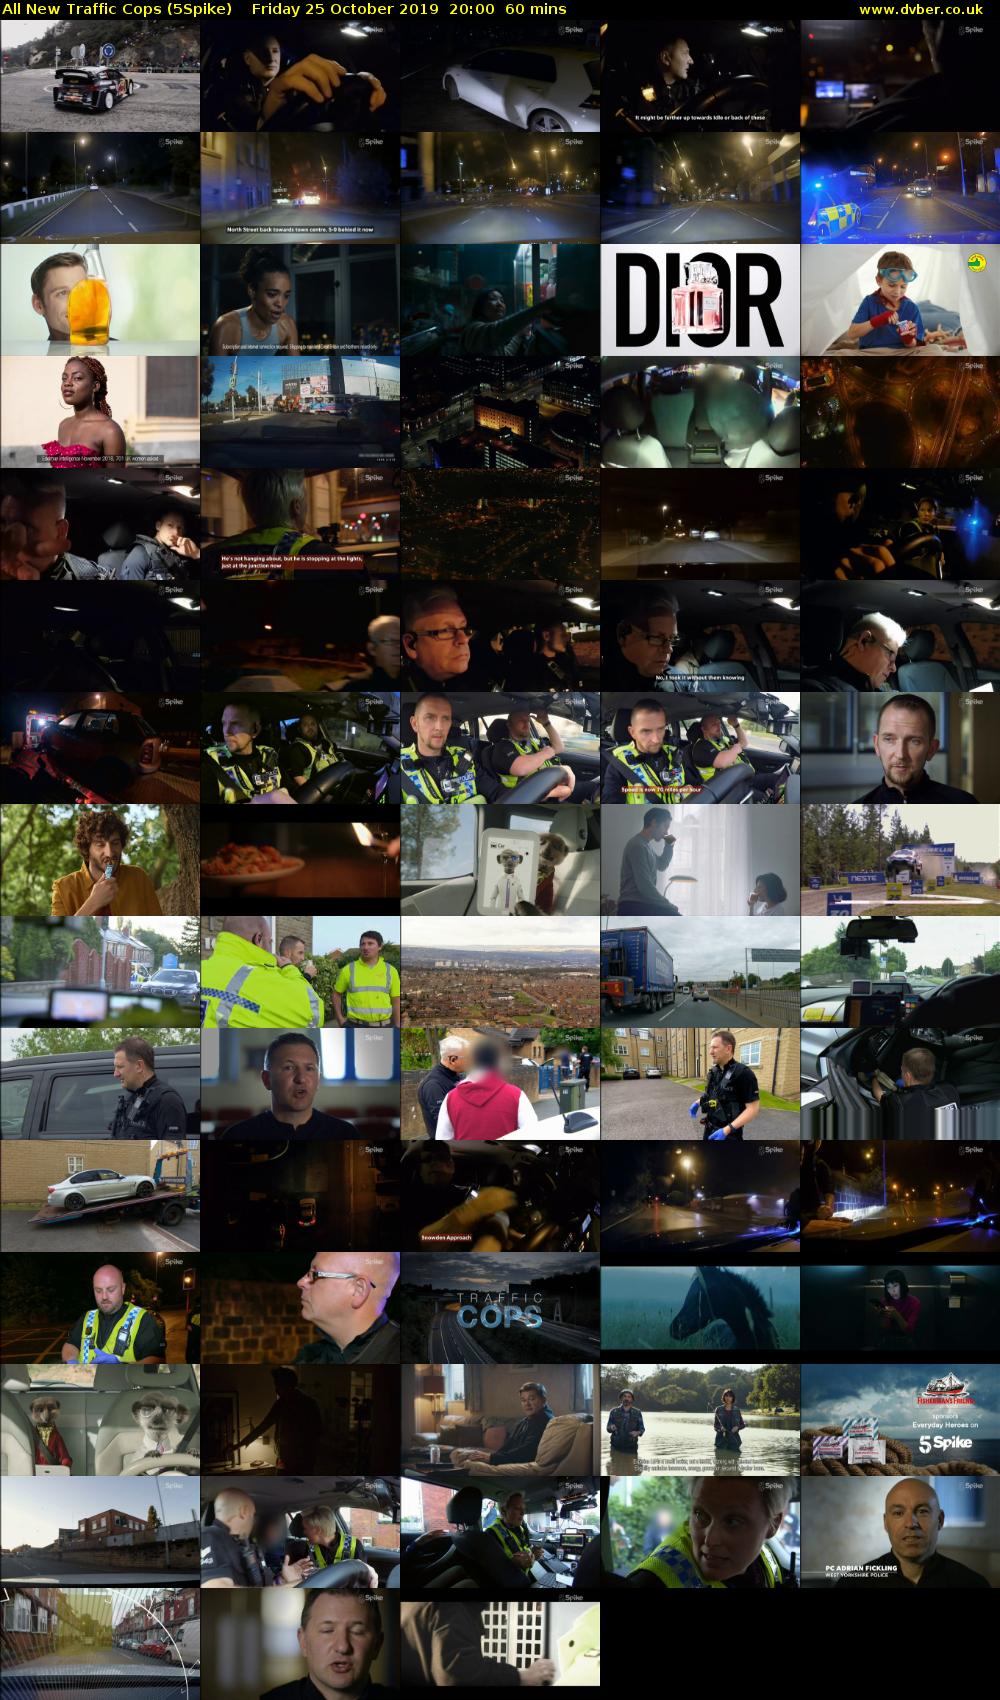 All New Traffic Cops (5Spike) Friday 25 October 2019 20:00 - 21:00